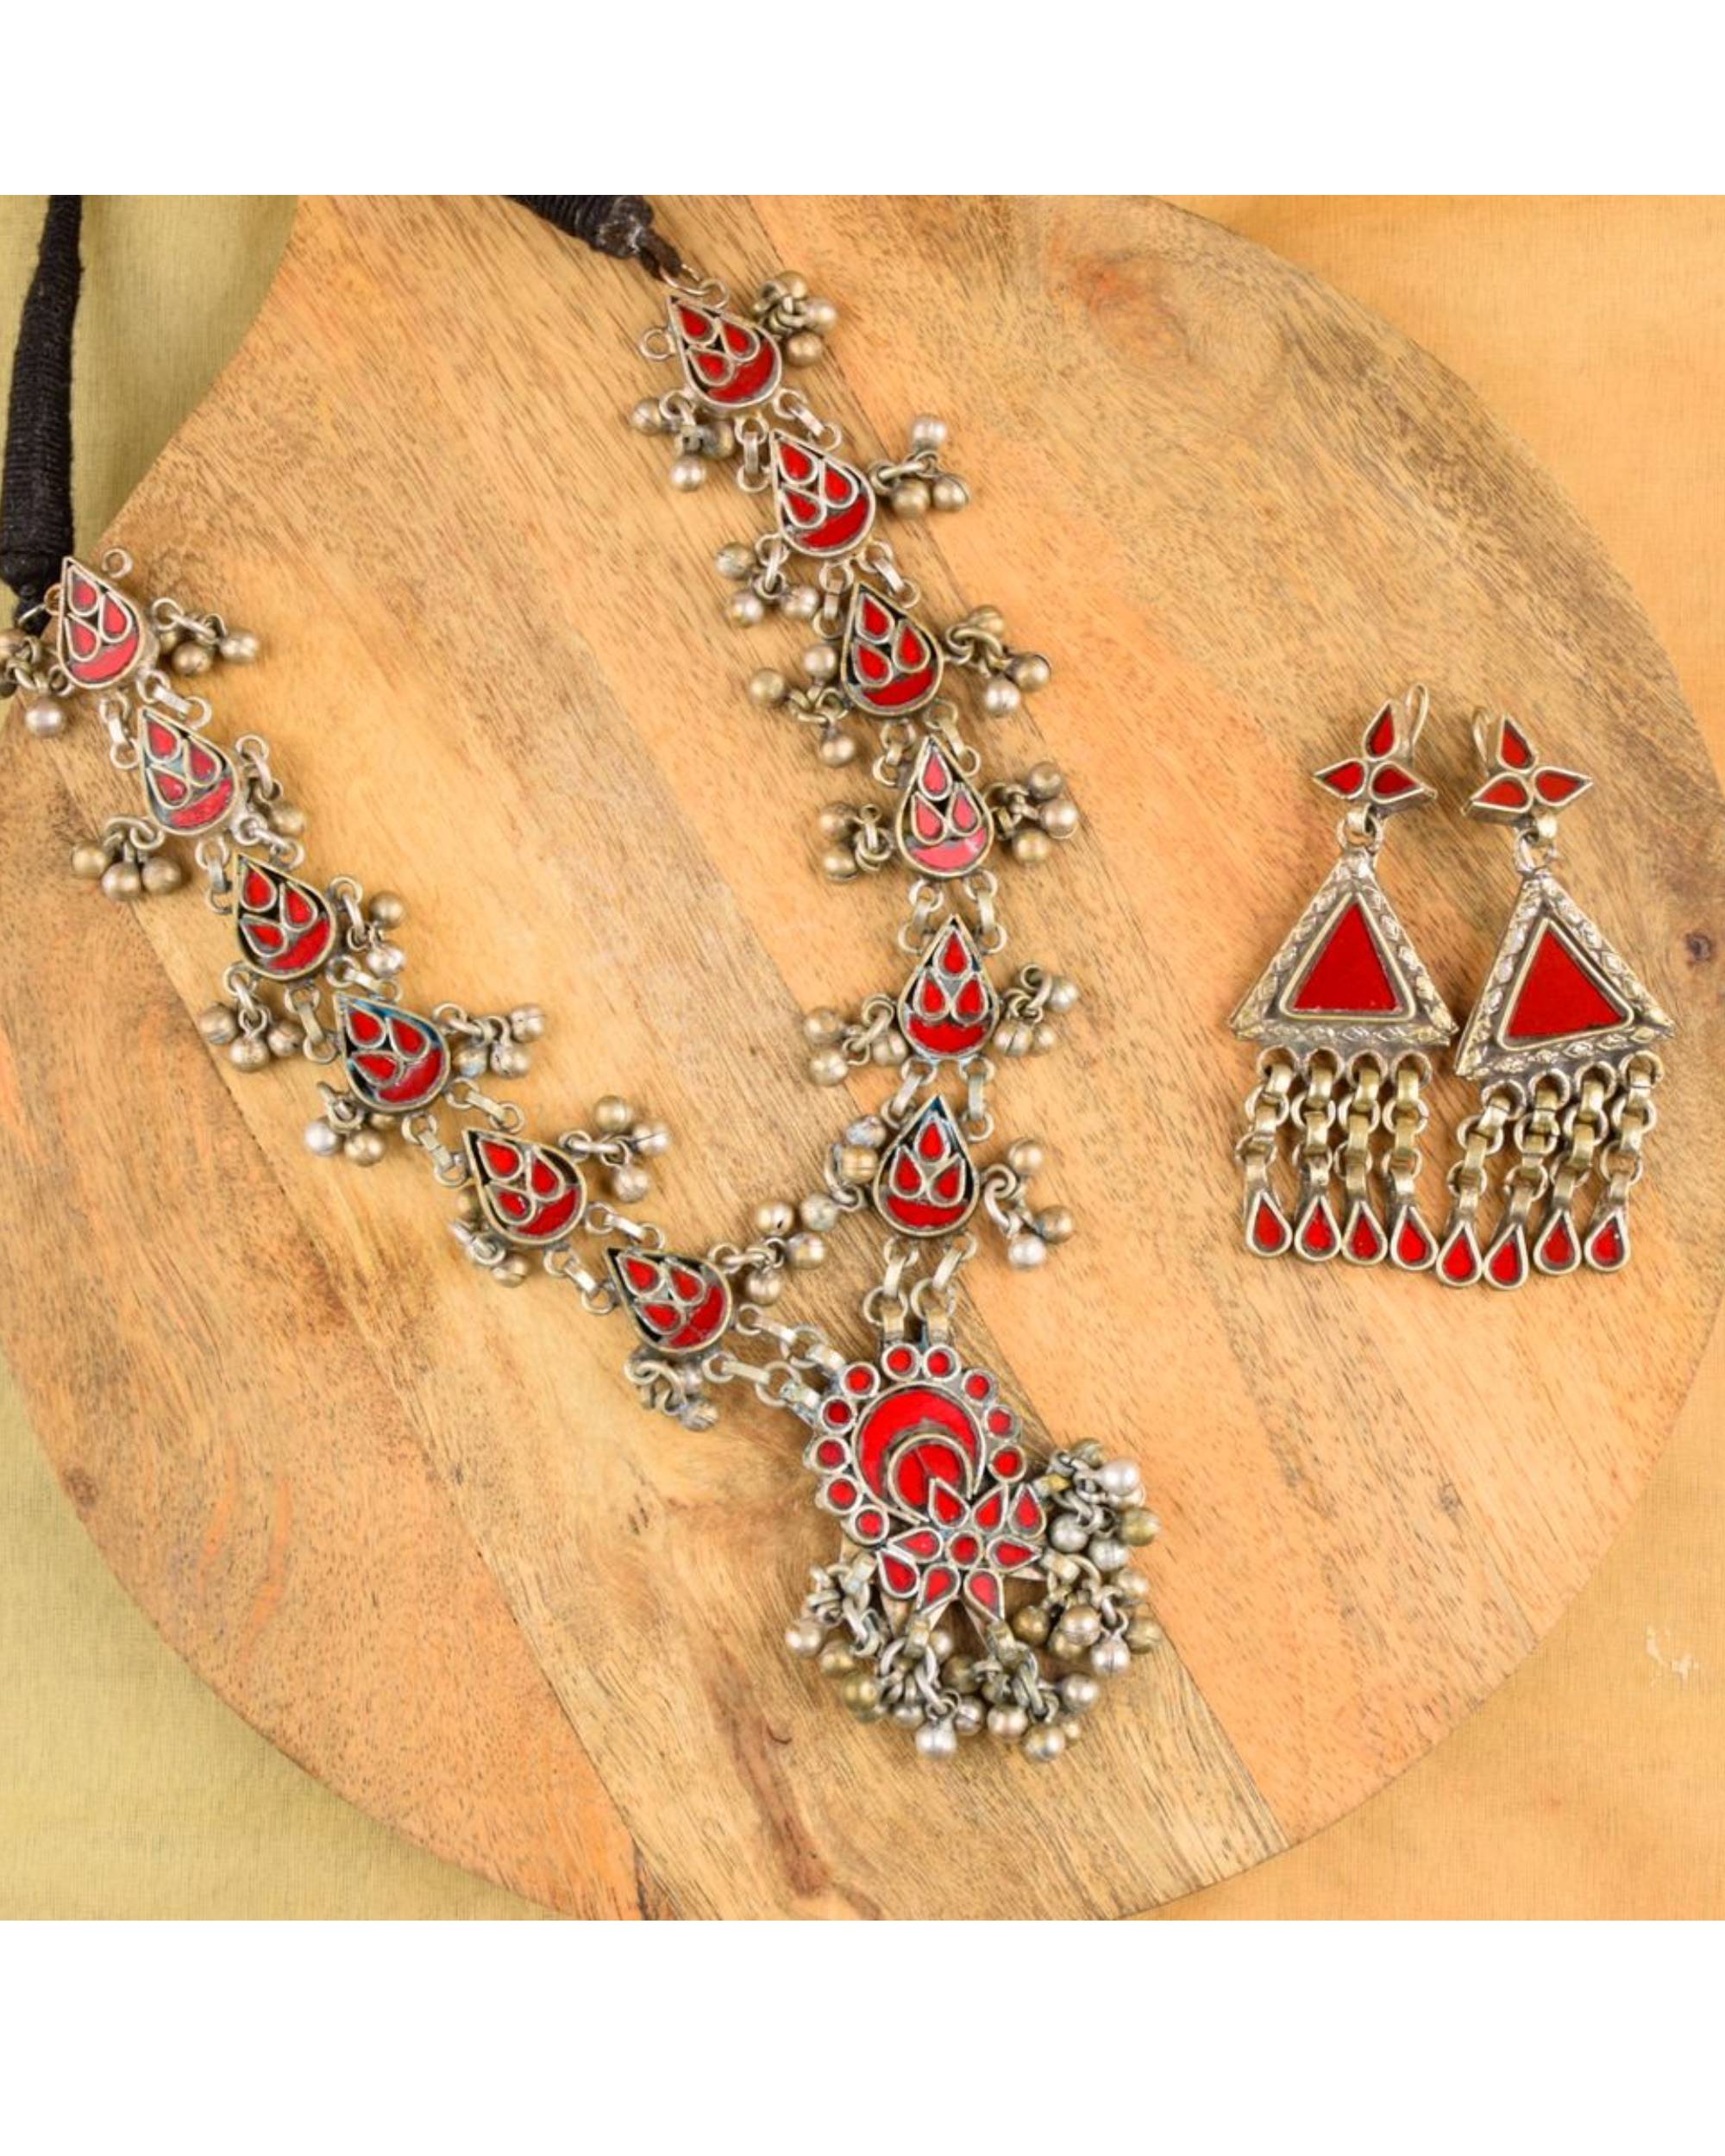 Red floral hand crafted glass work neckpiece with earrings - set of two